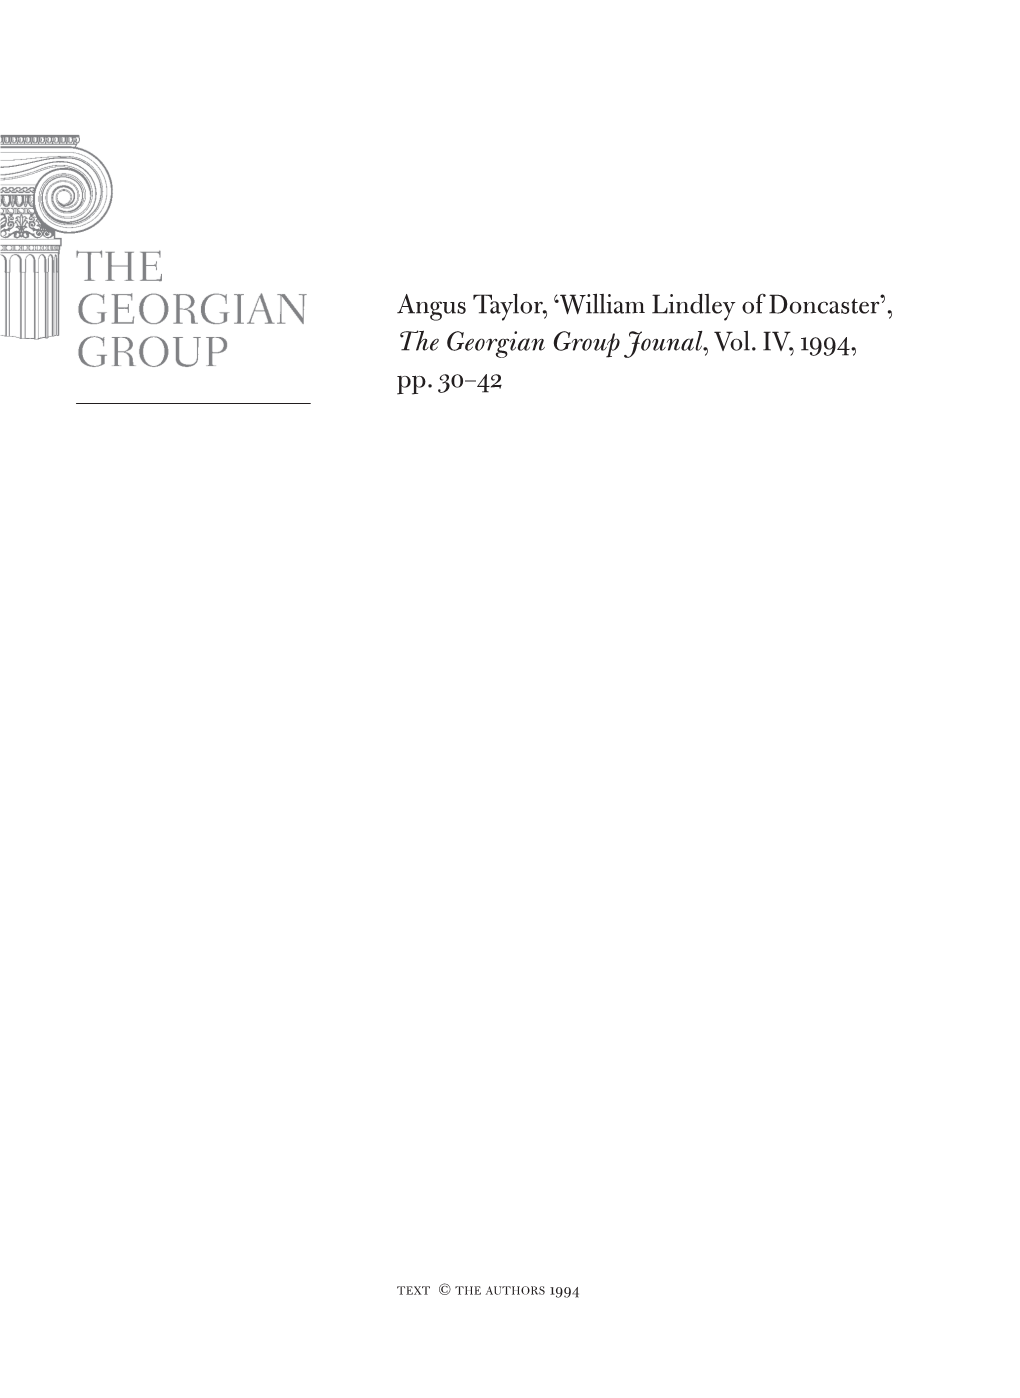 Angus Taylor, 'William Lindley of Doncaster', the Georgian Group Jounal, Vol. IV, 1994, Pp. 30–42